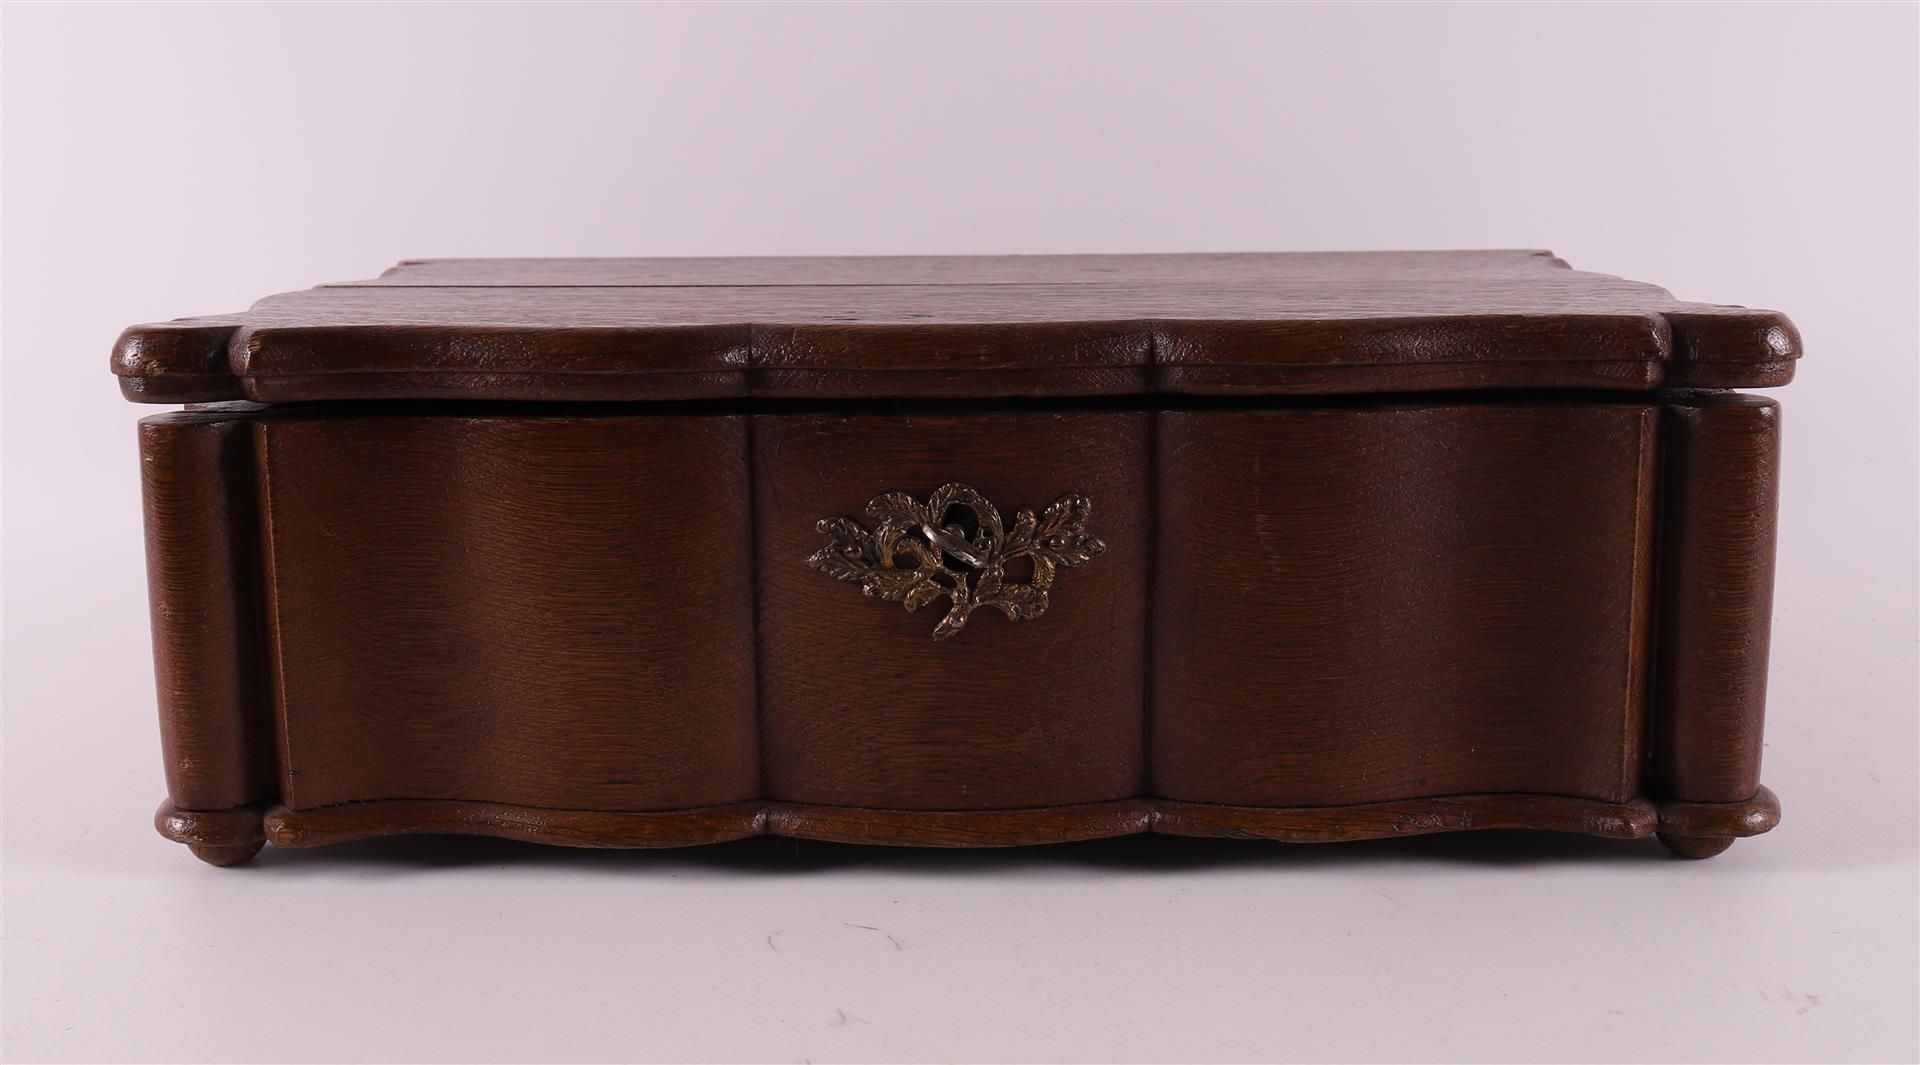 An organ-curved oak document box, 18th century. - Image 3 of 5